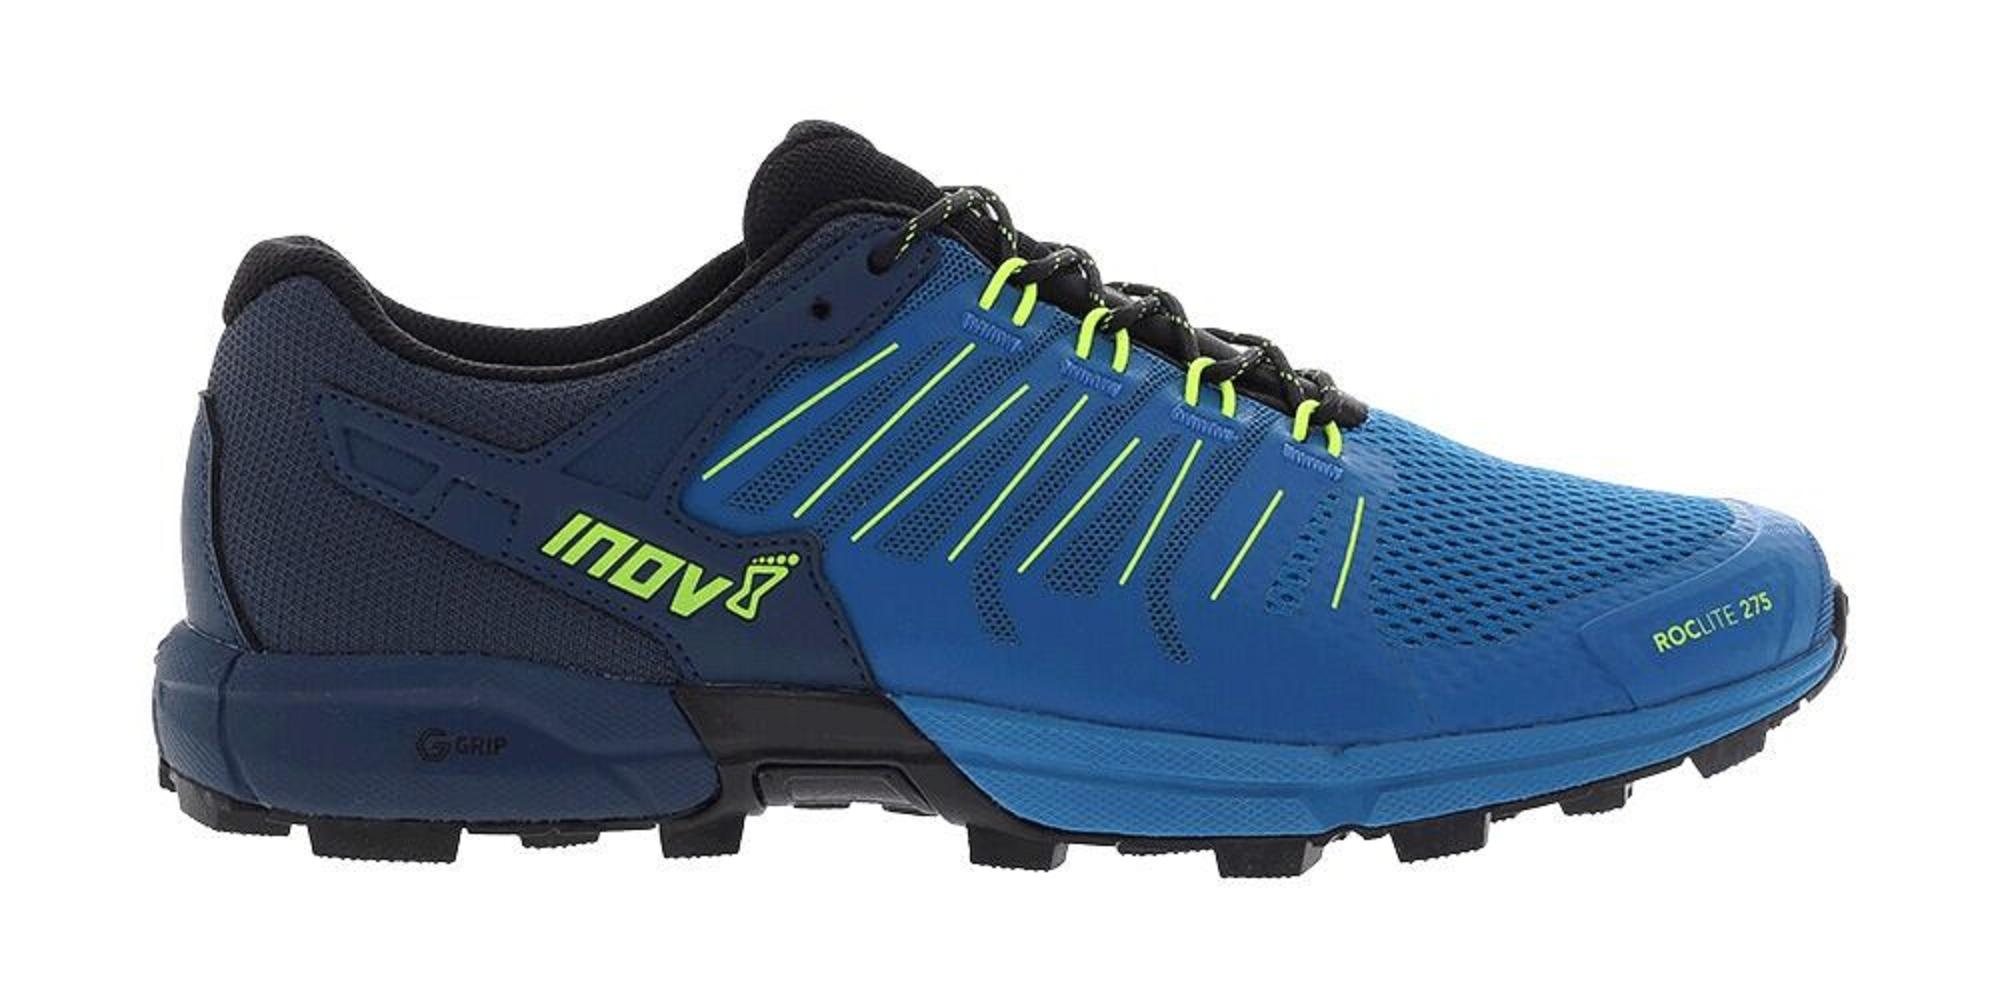 Inov-8 Roclite G 275 South Africa - Trail Running Shoes Men Yellow/Black WYVE95316